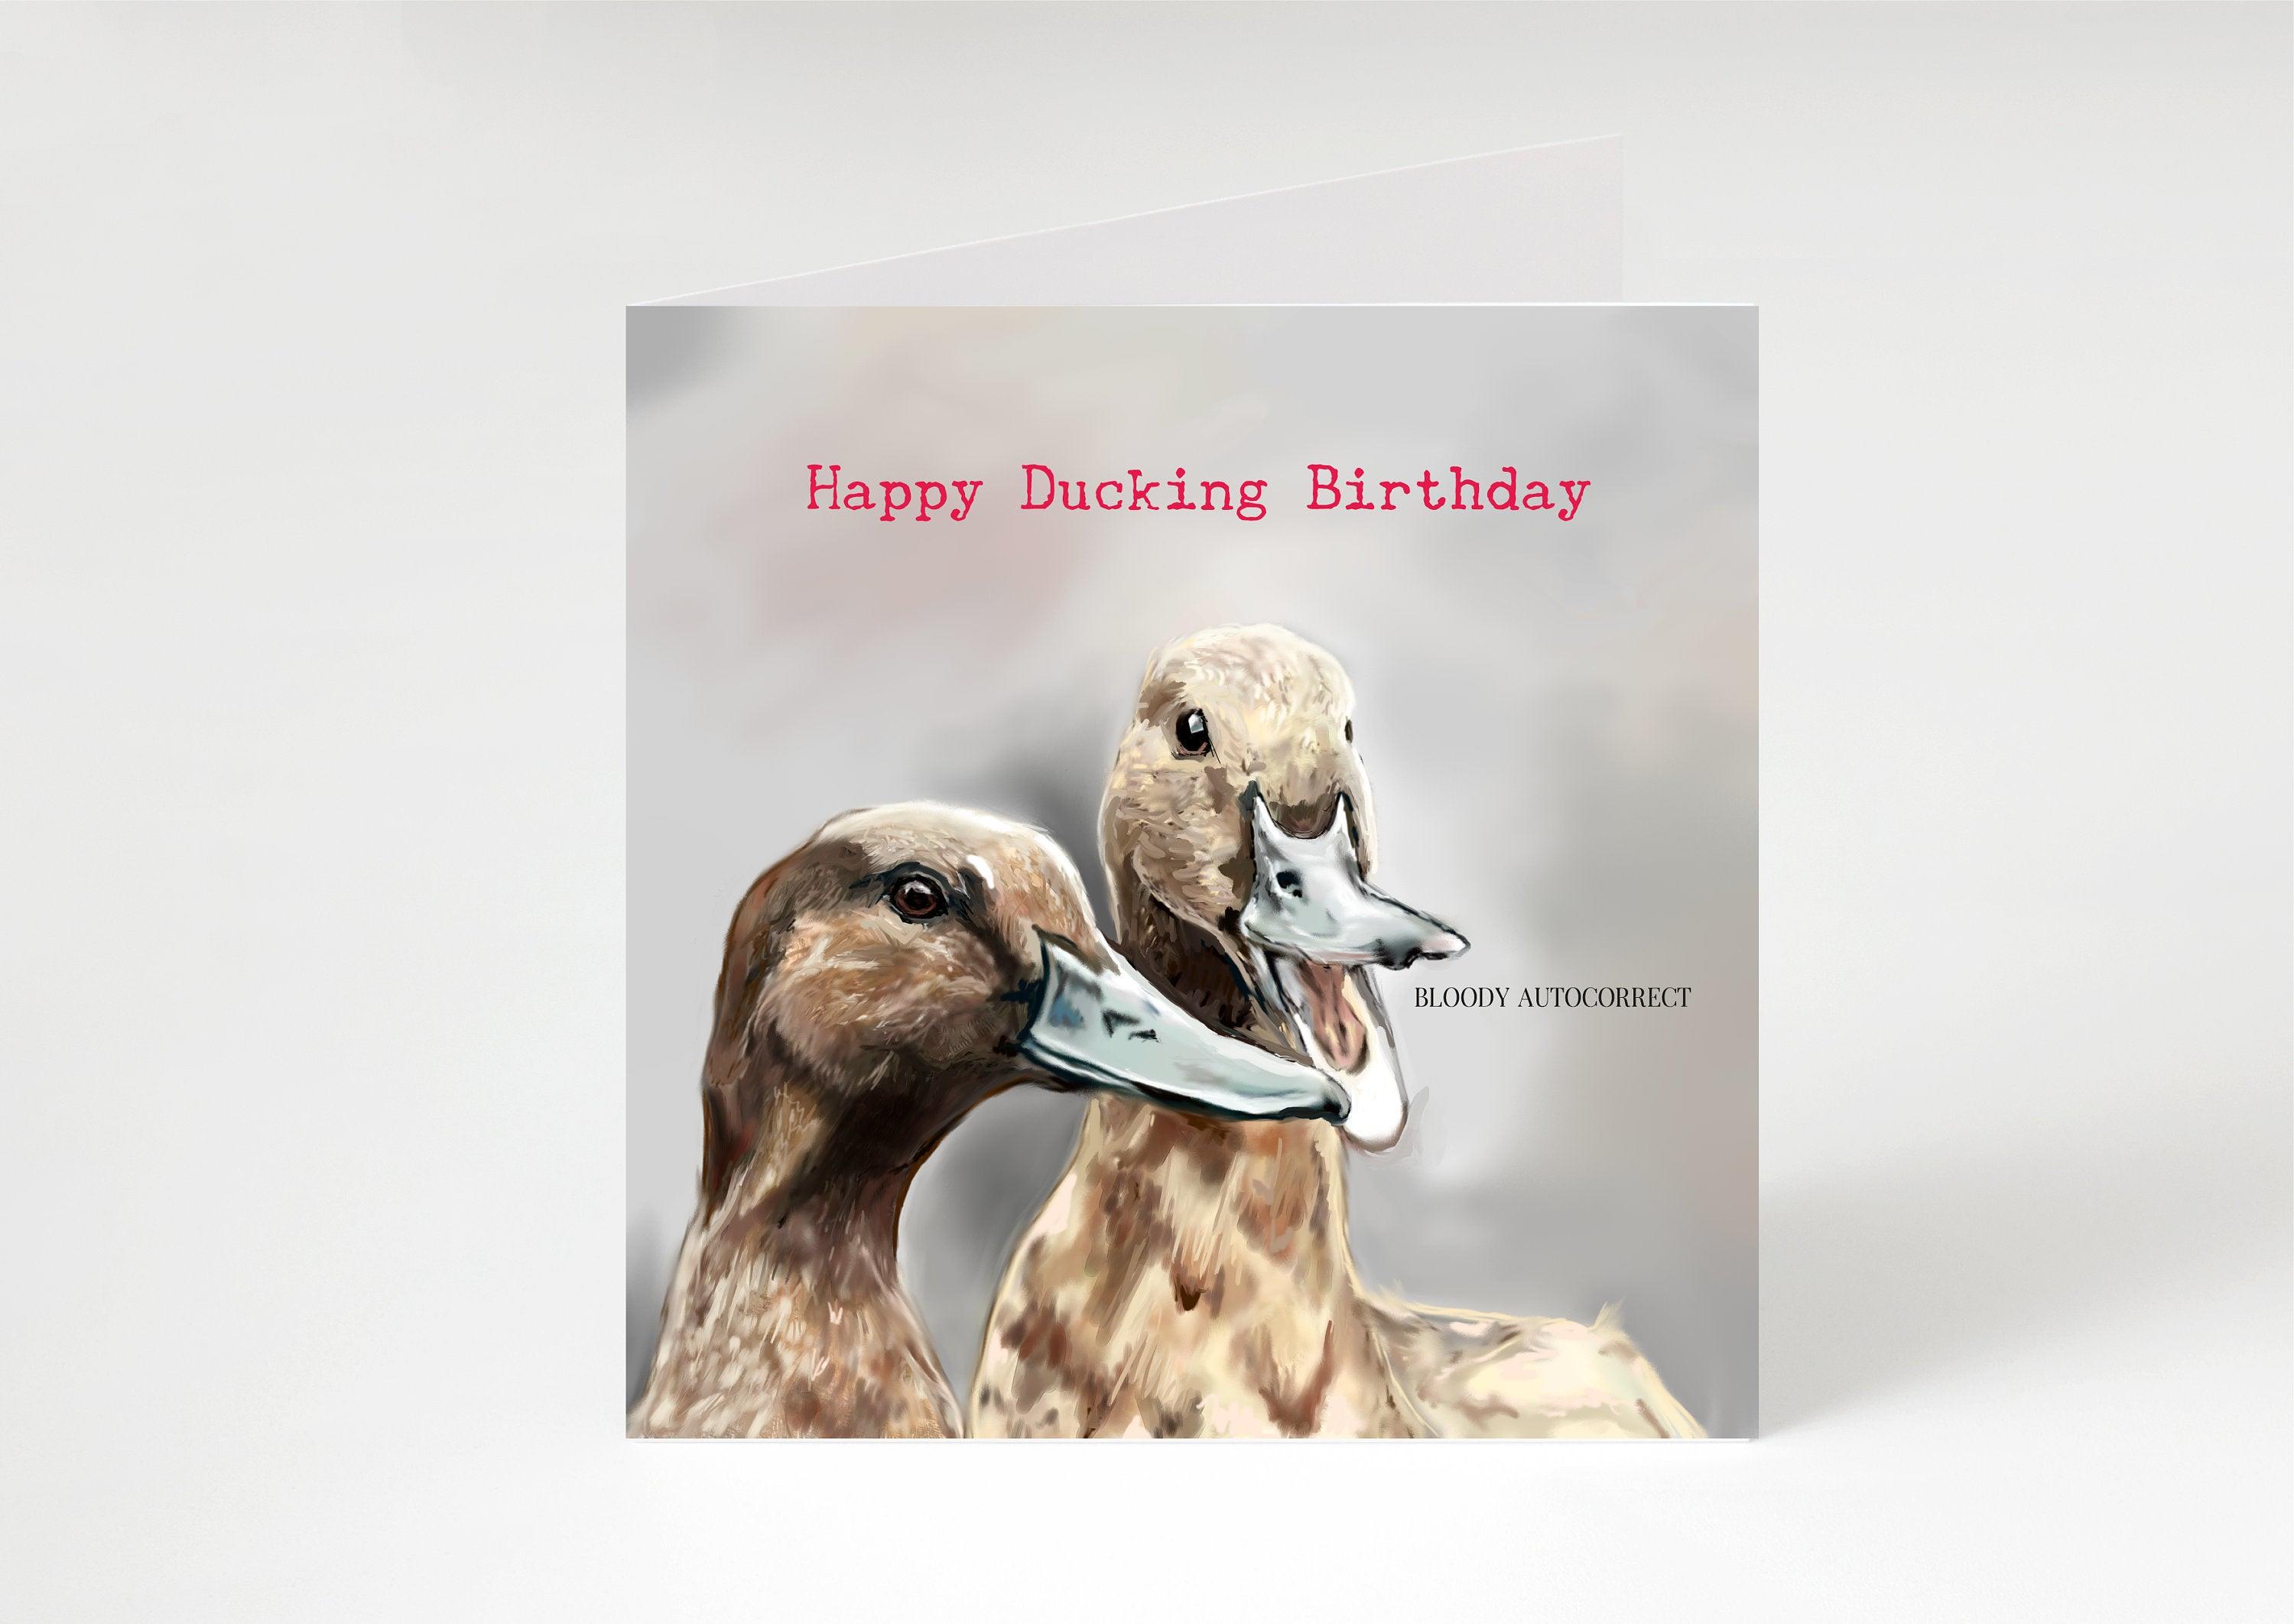 Funny Duck Birthday card - Happy Ducking Birthday -Adult Birthday card - Funny- Rude- birthday greetings card for male- female -open card